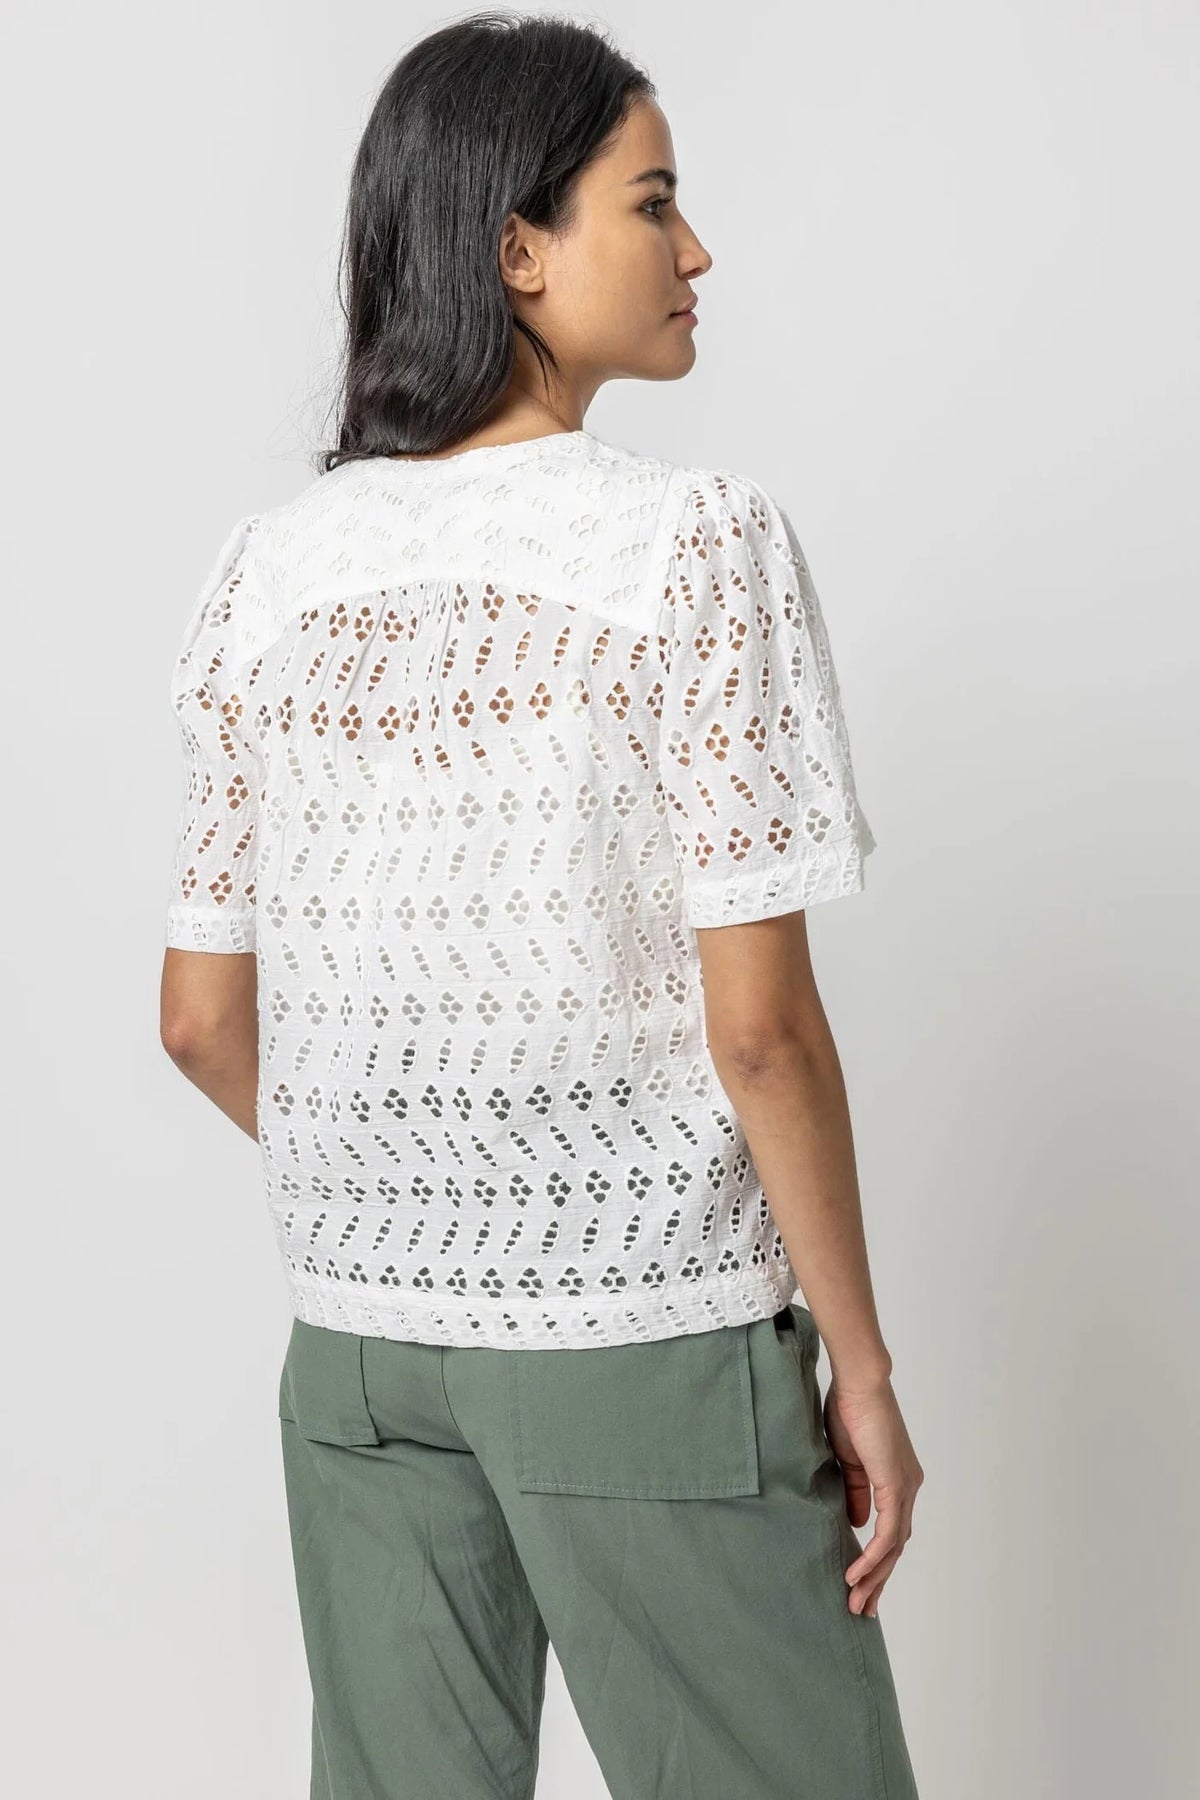 Eyelet Button Down Top in White